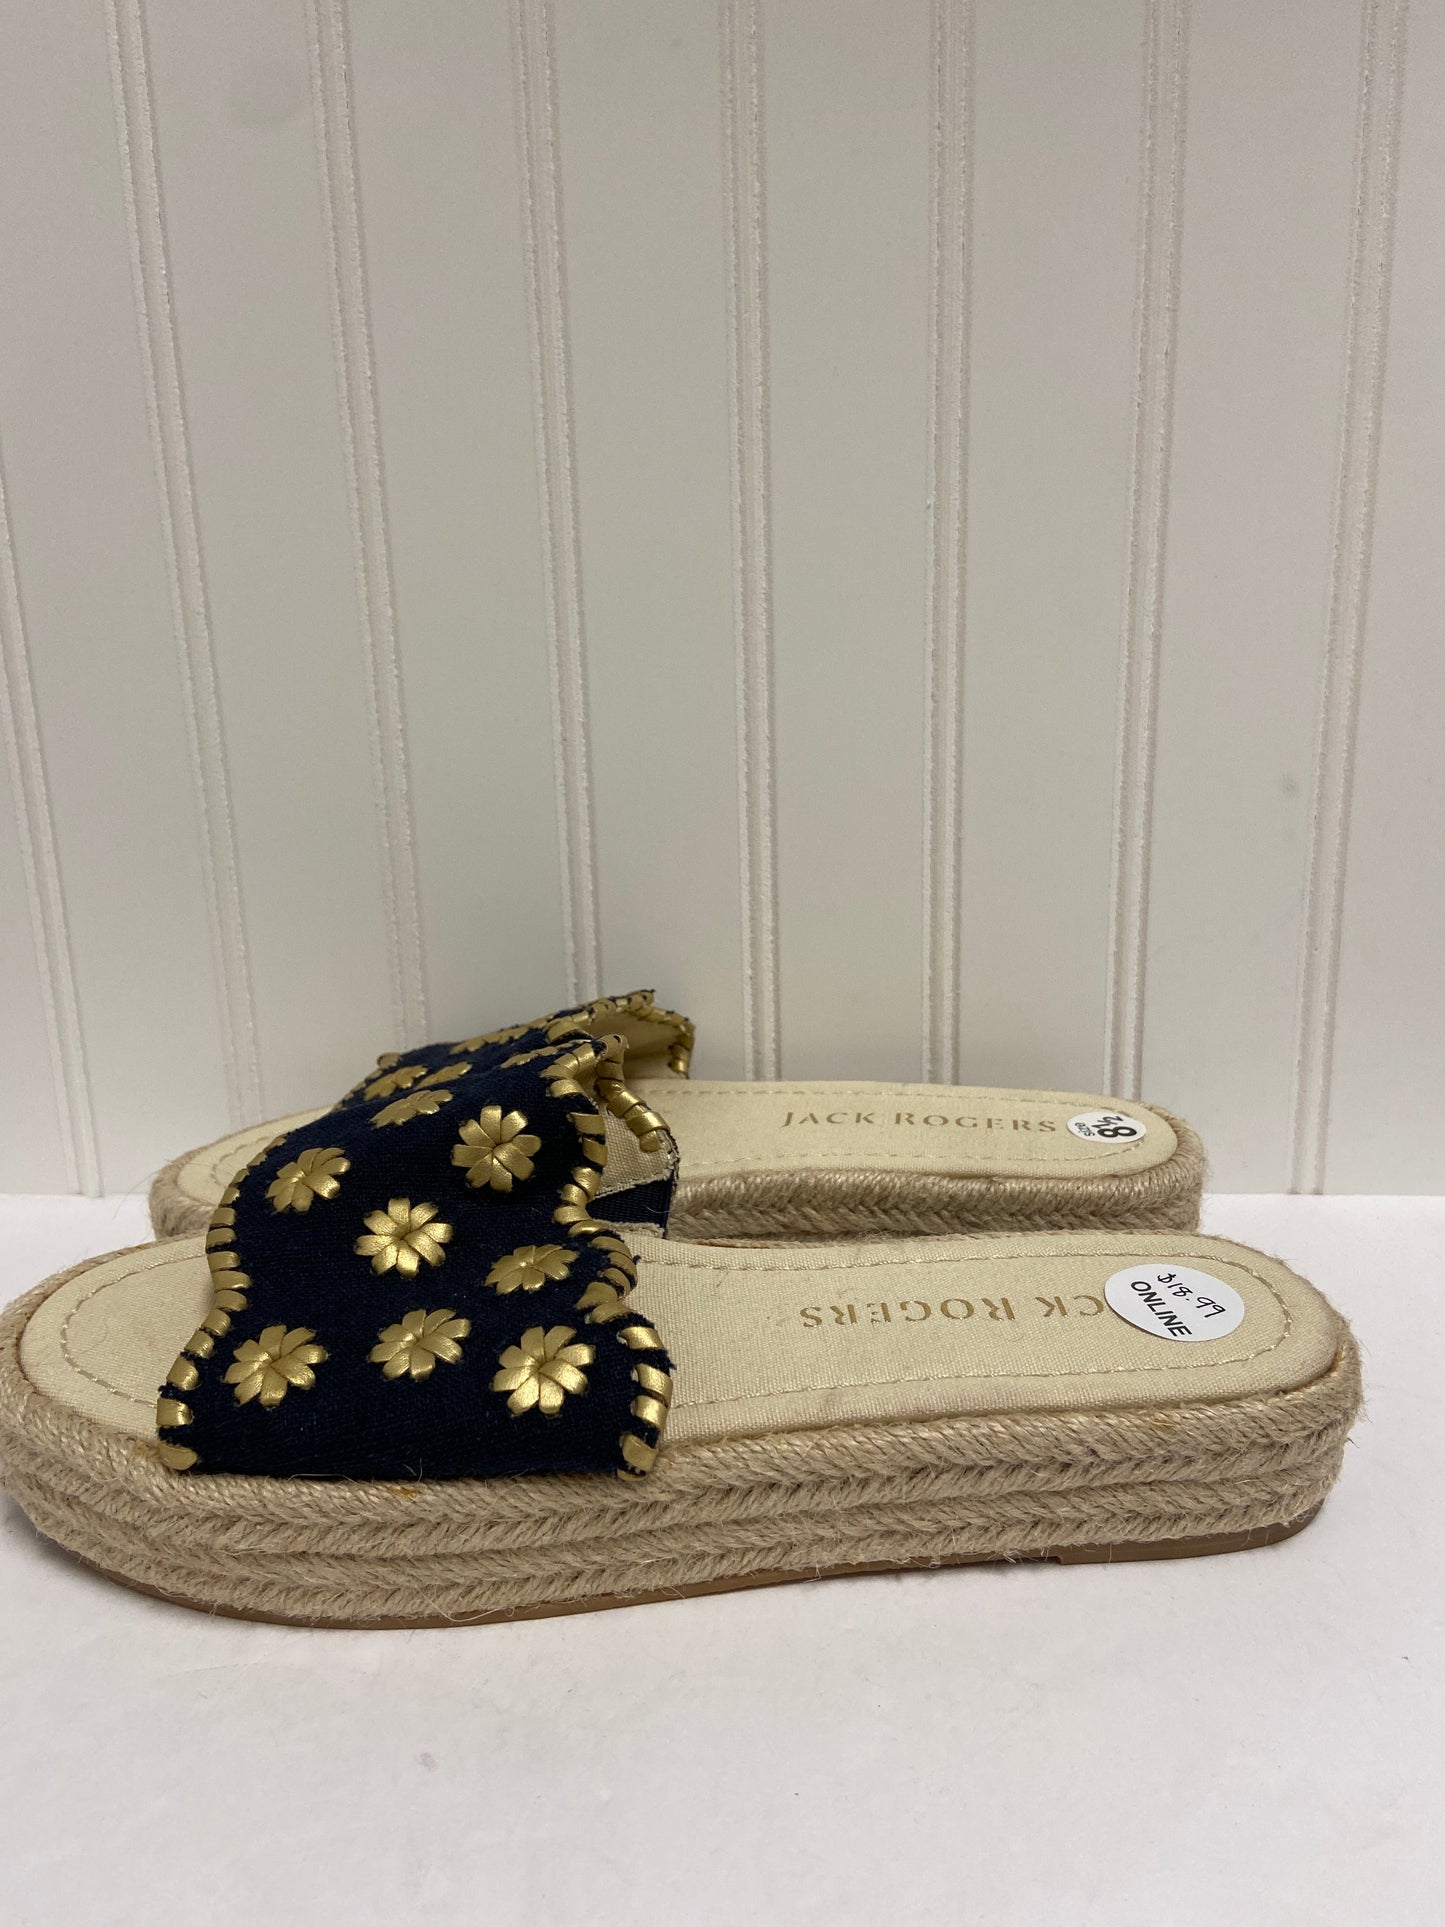 Sandals Flats By Jack Rogers  Size: 8.5